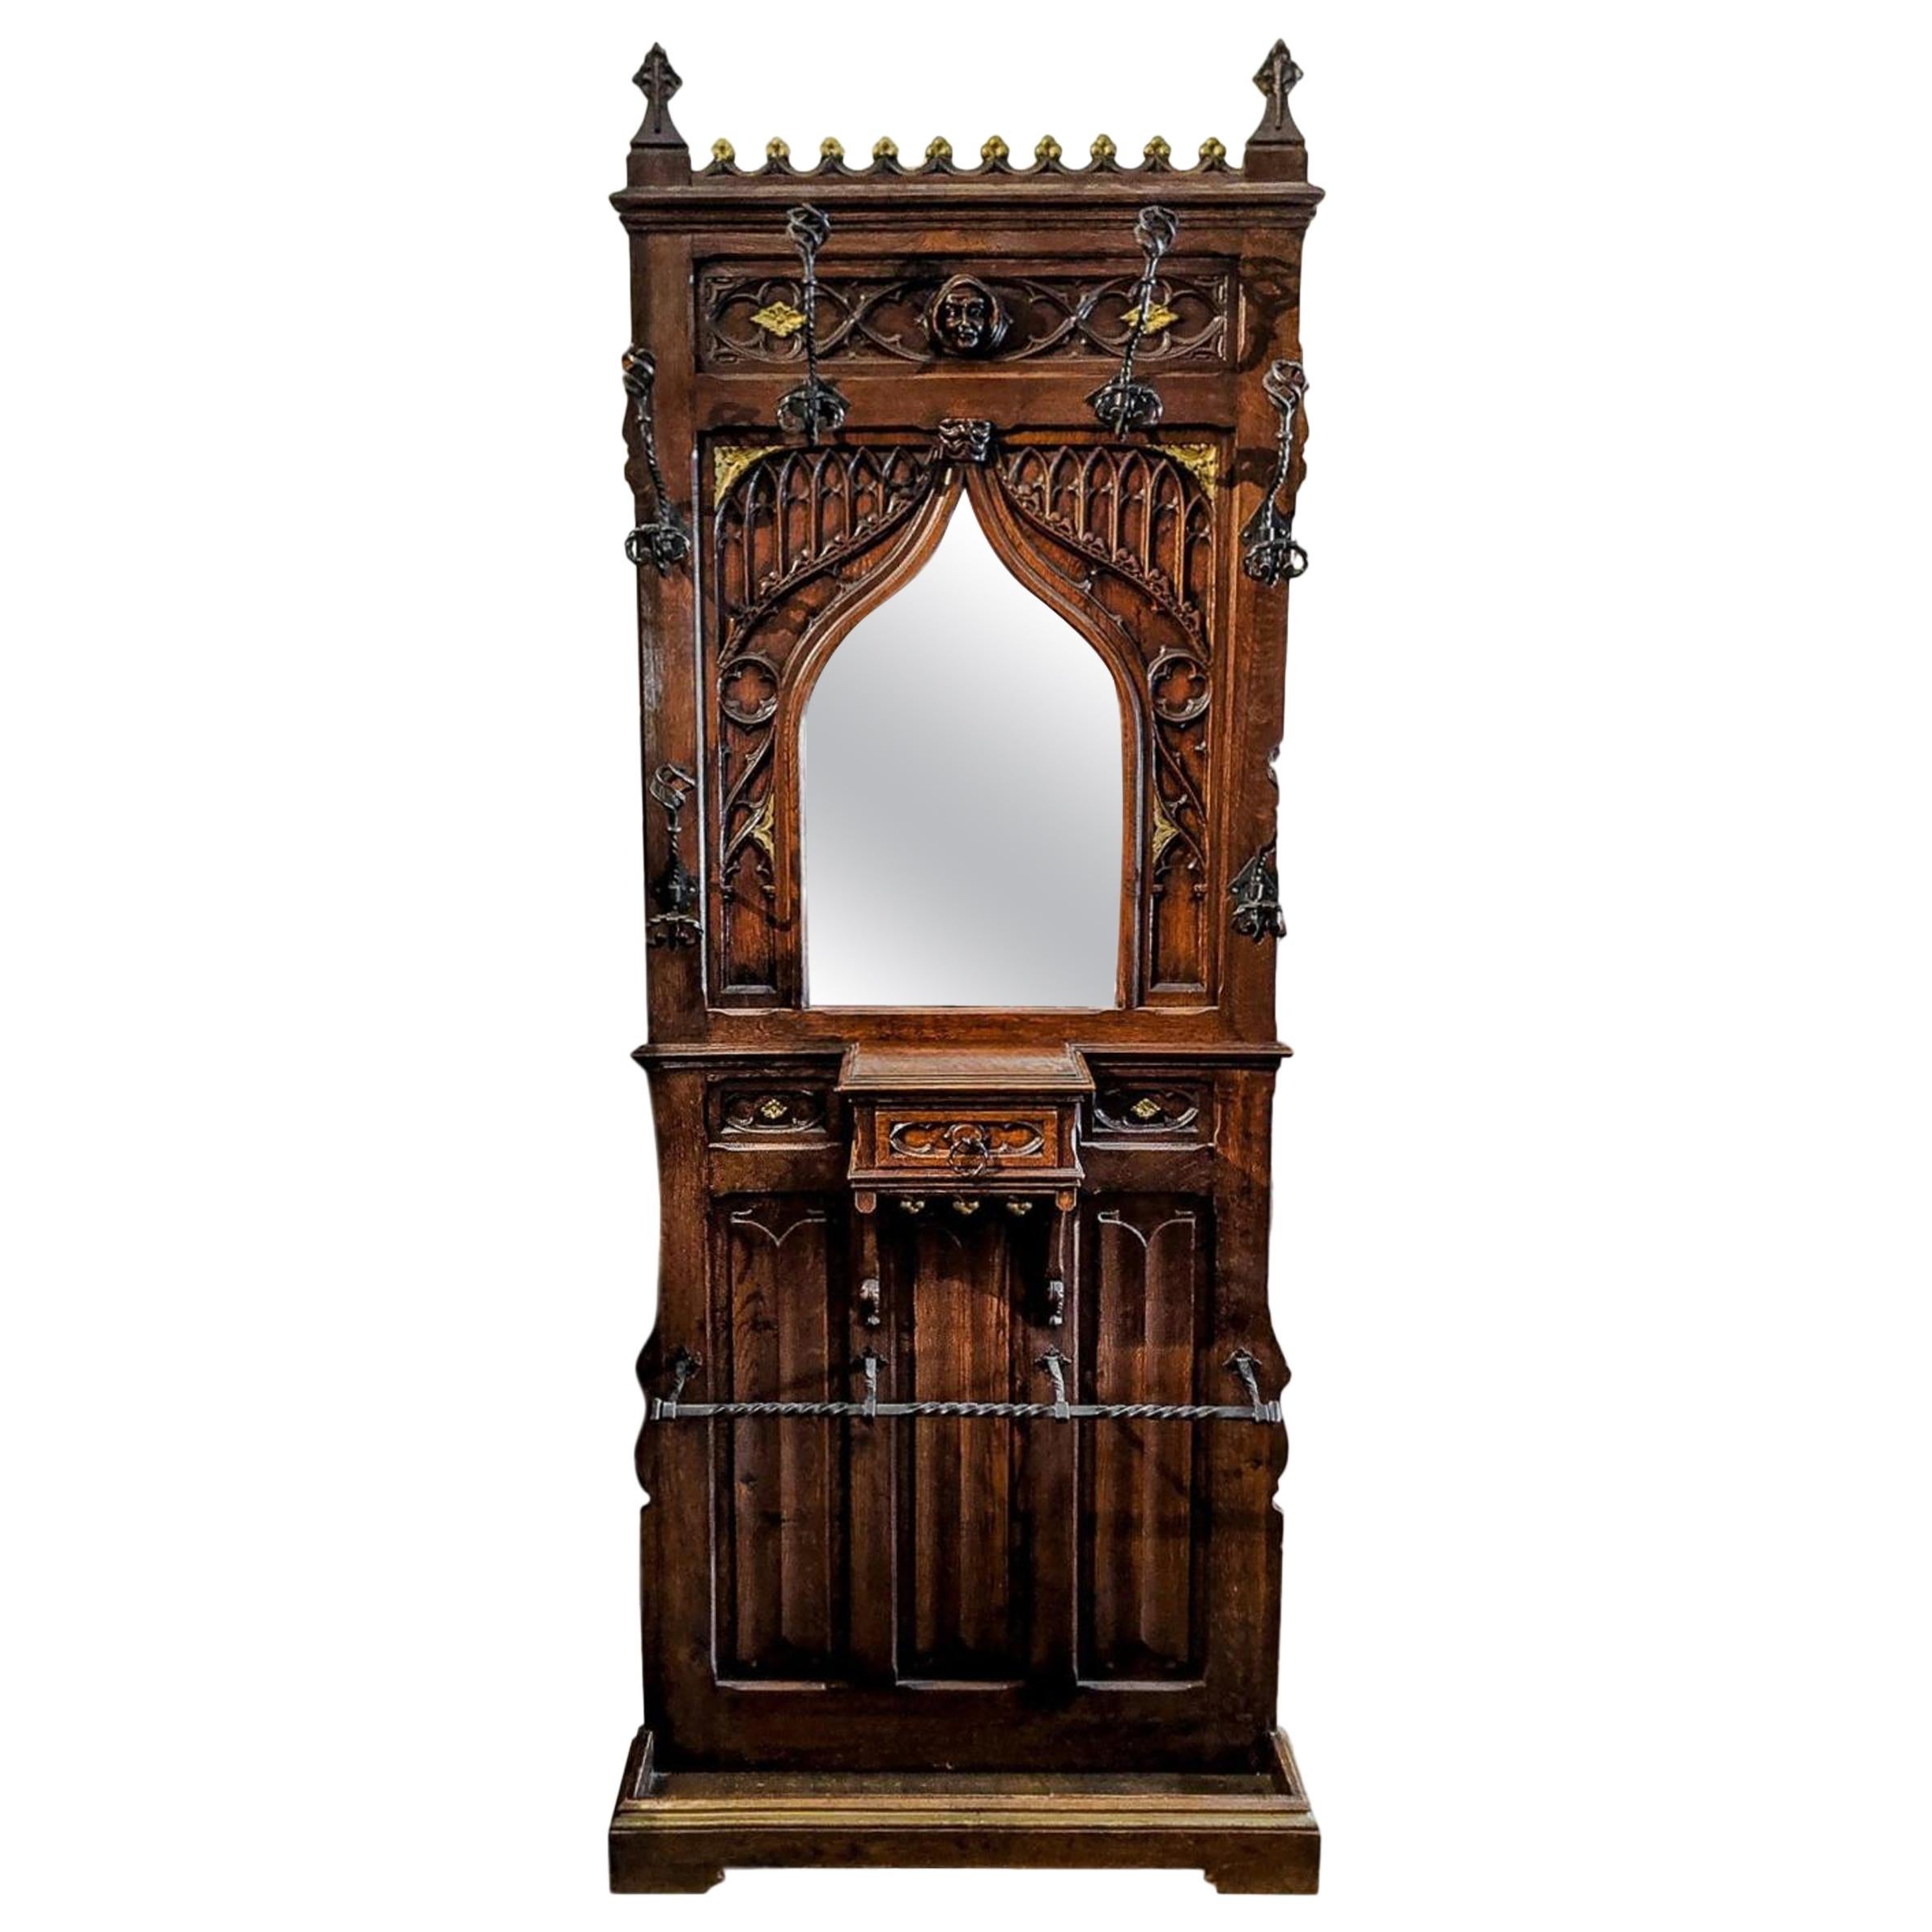 Gothic Revival Coat Rack Hall Tree Umbrella Stand Hand Carved Mirror